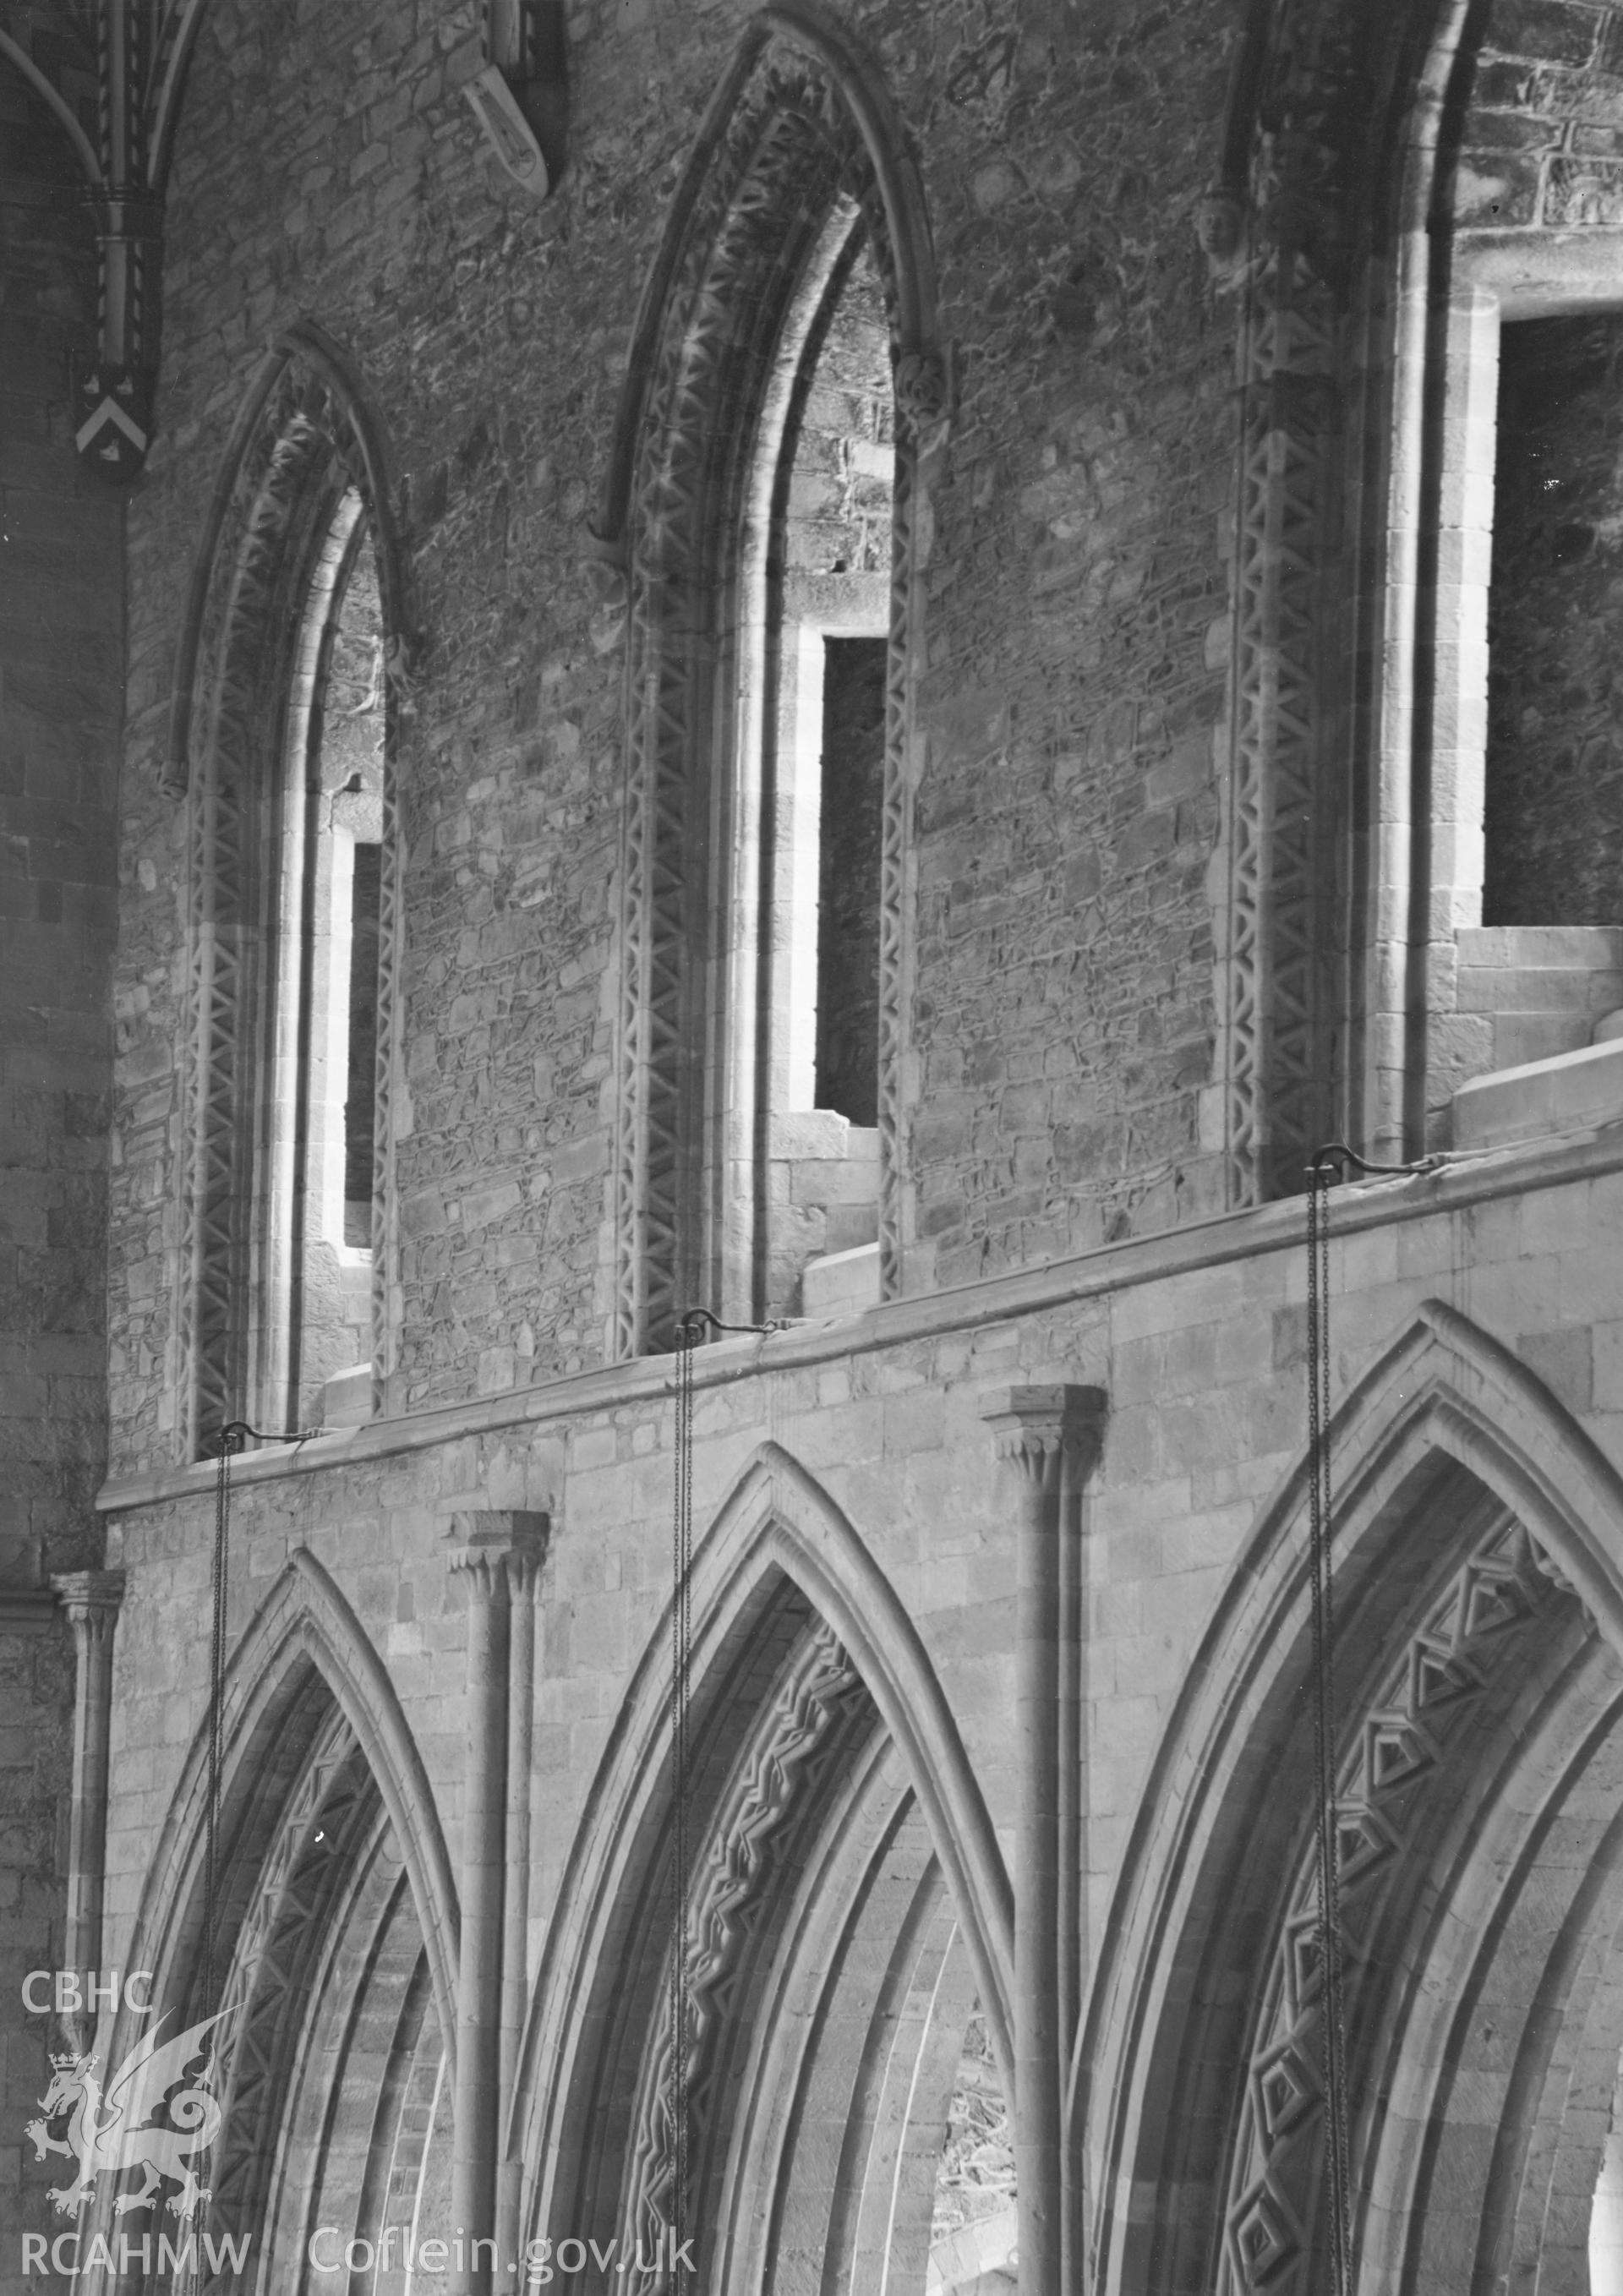 Digital copy of a black and white nitrate negative showing interior view of St. David's Cathedral, taken by E.W. Lovegrove, July 1936